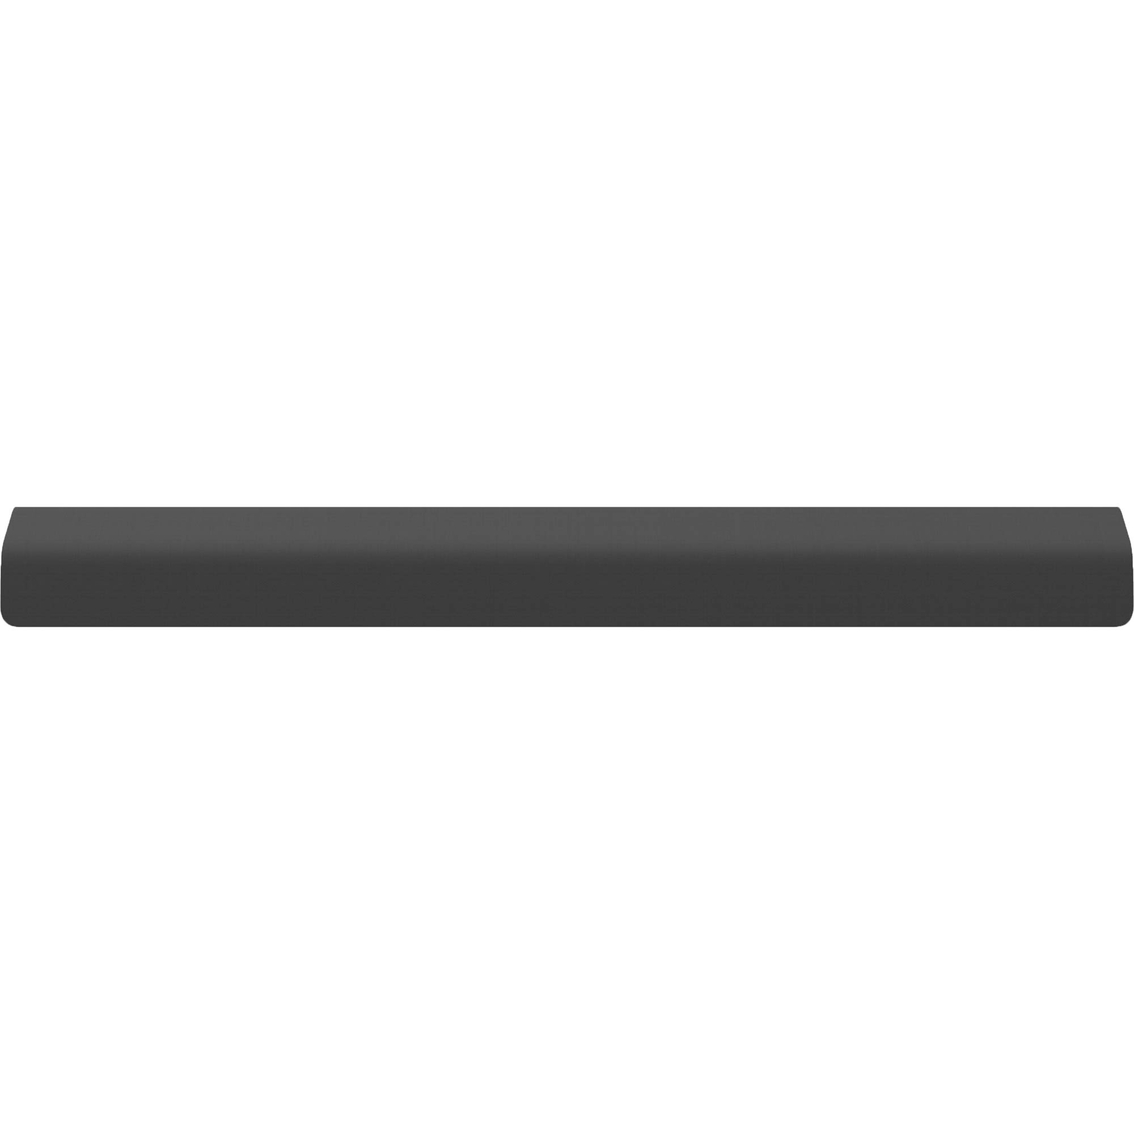 Vizio M-Series All-In-One 2.1 Sound Bar with Dolby Atmos and DTS:X - Image 3 of 8